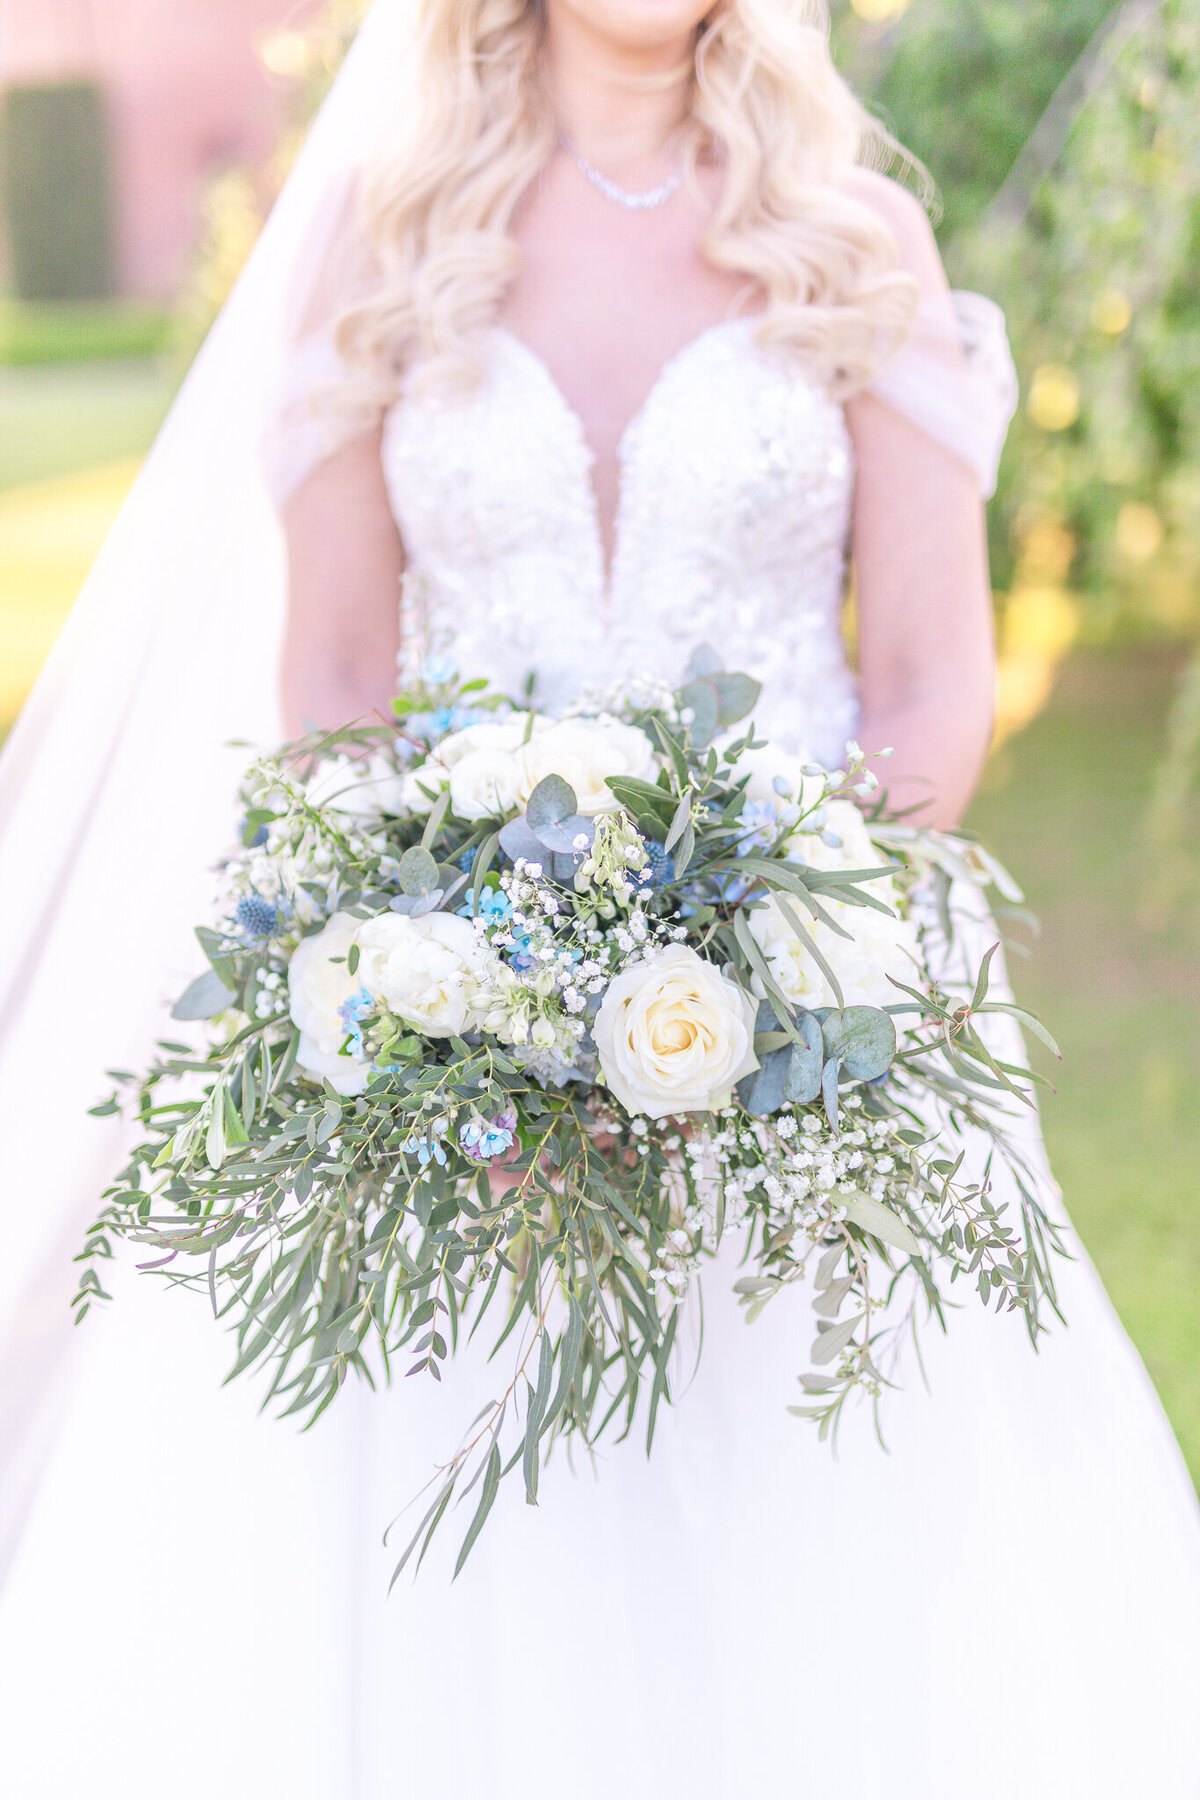 Bride holding white rose and blue flower bouquet